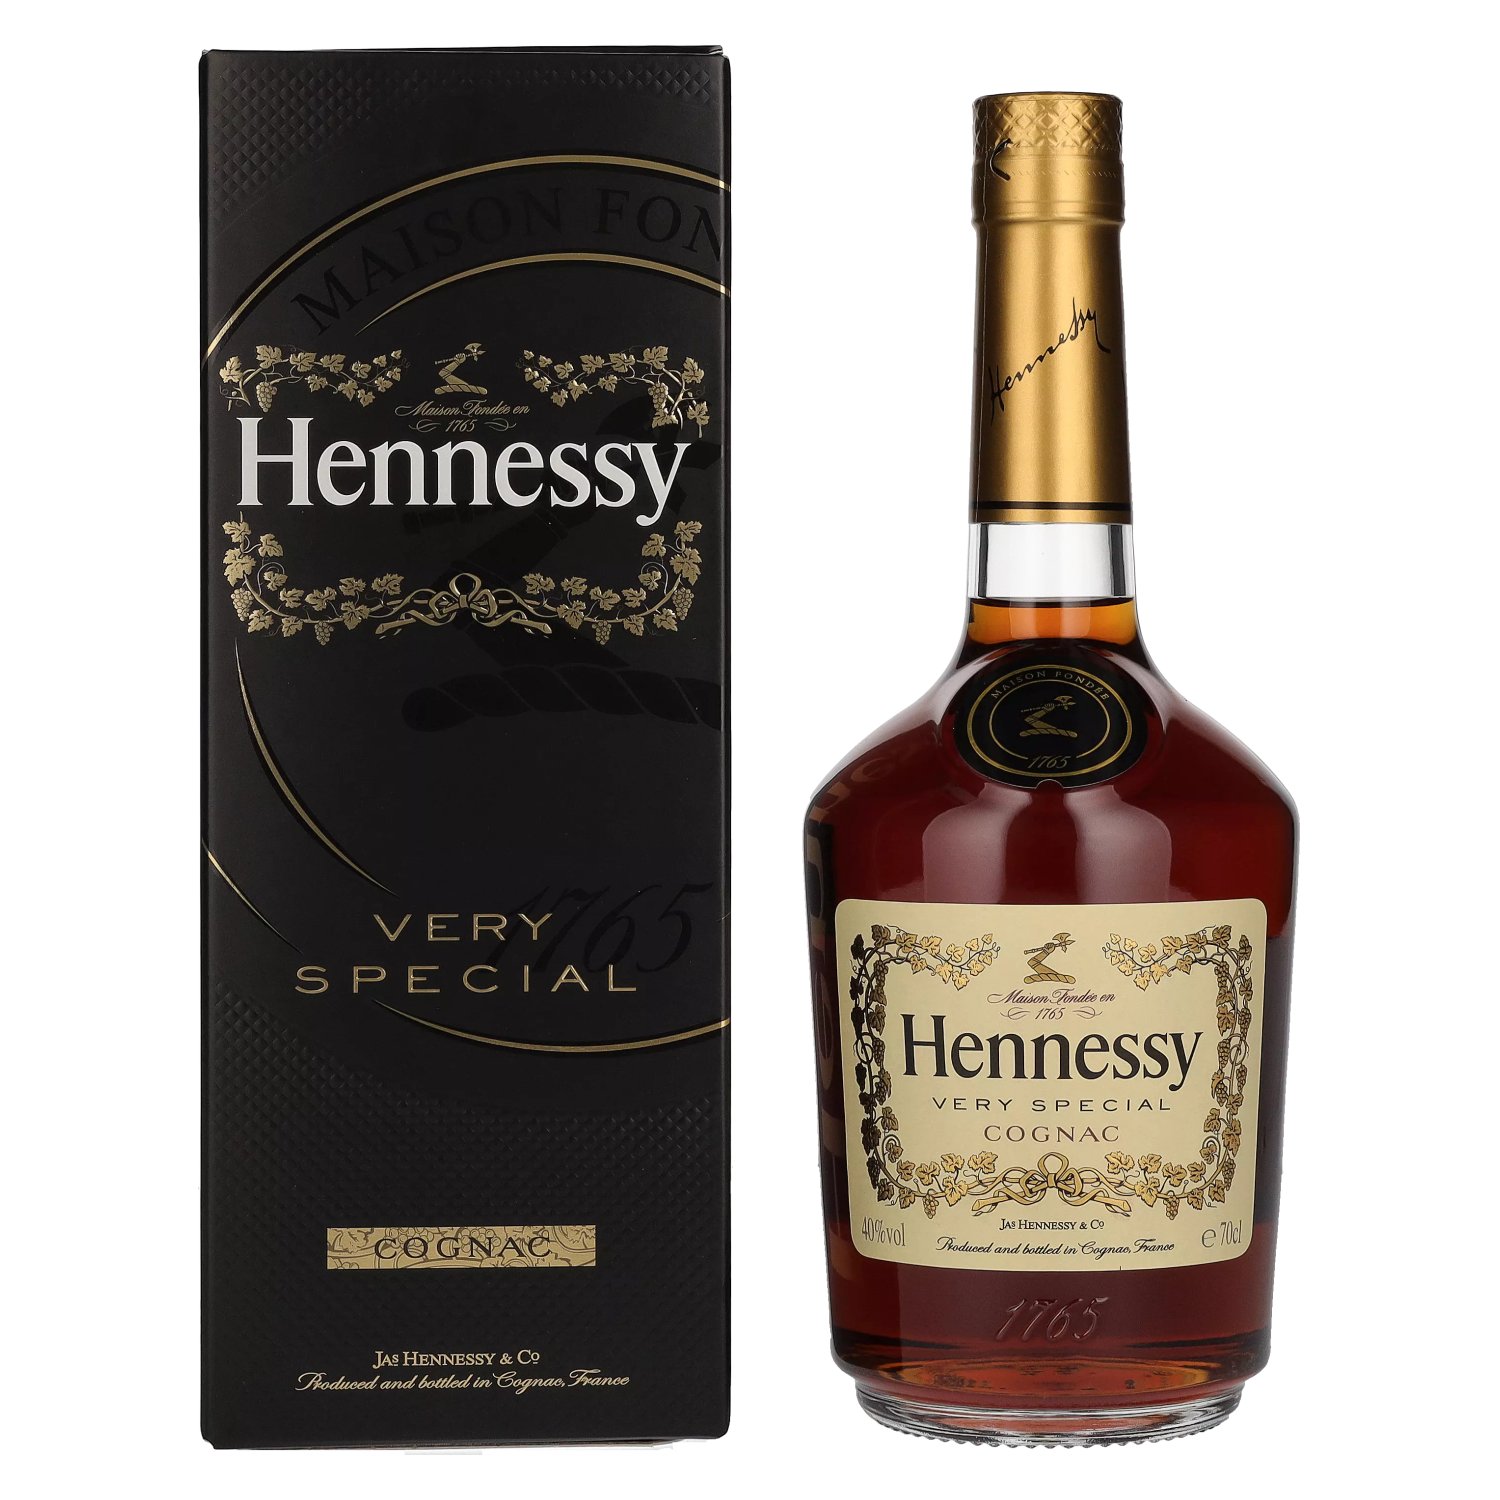 Very Cognac Hennessy in Special Vol. 40% 0,7l Giftbox